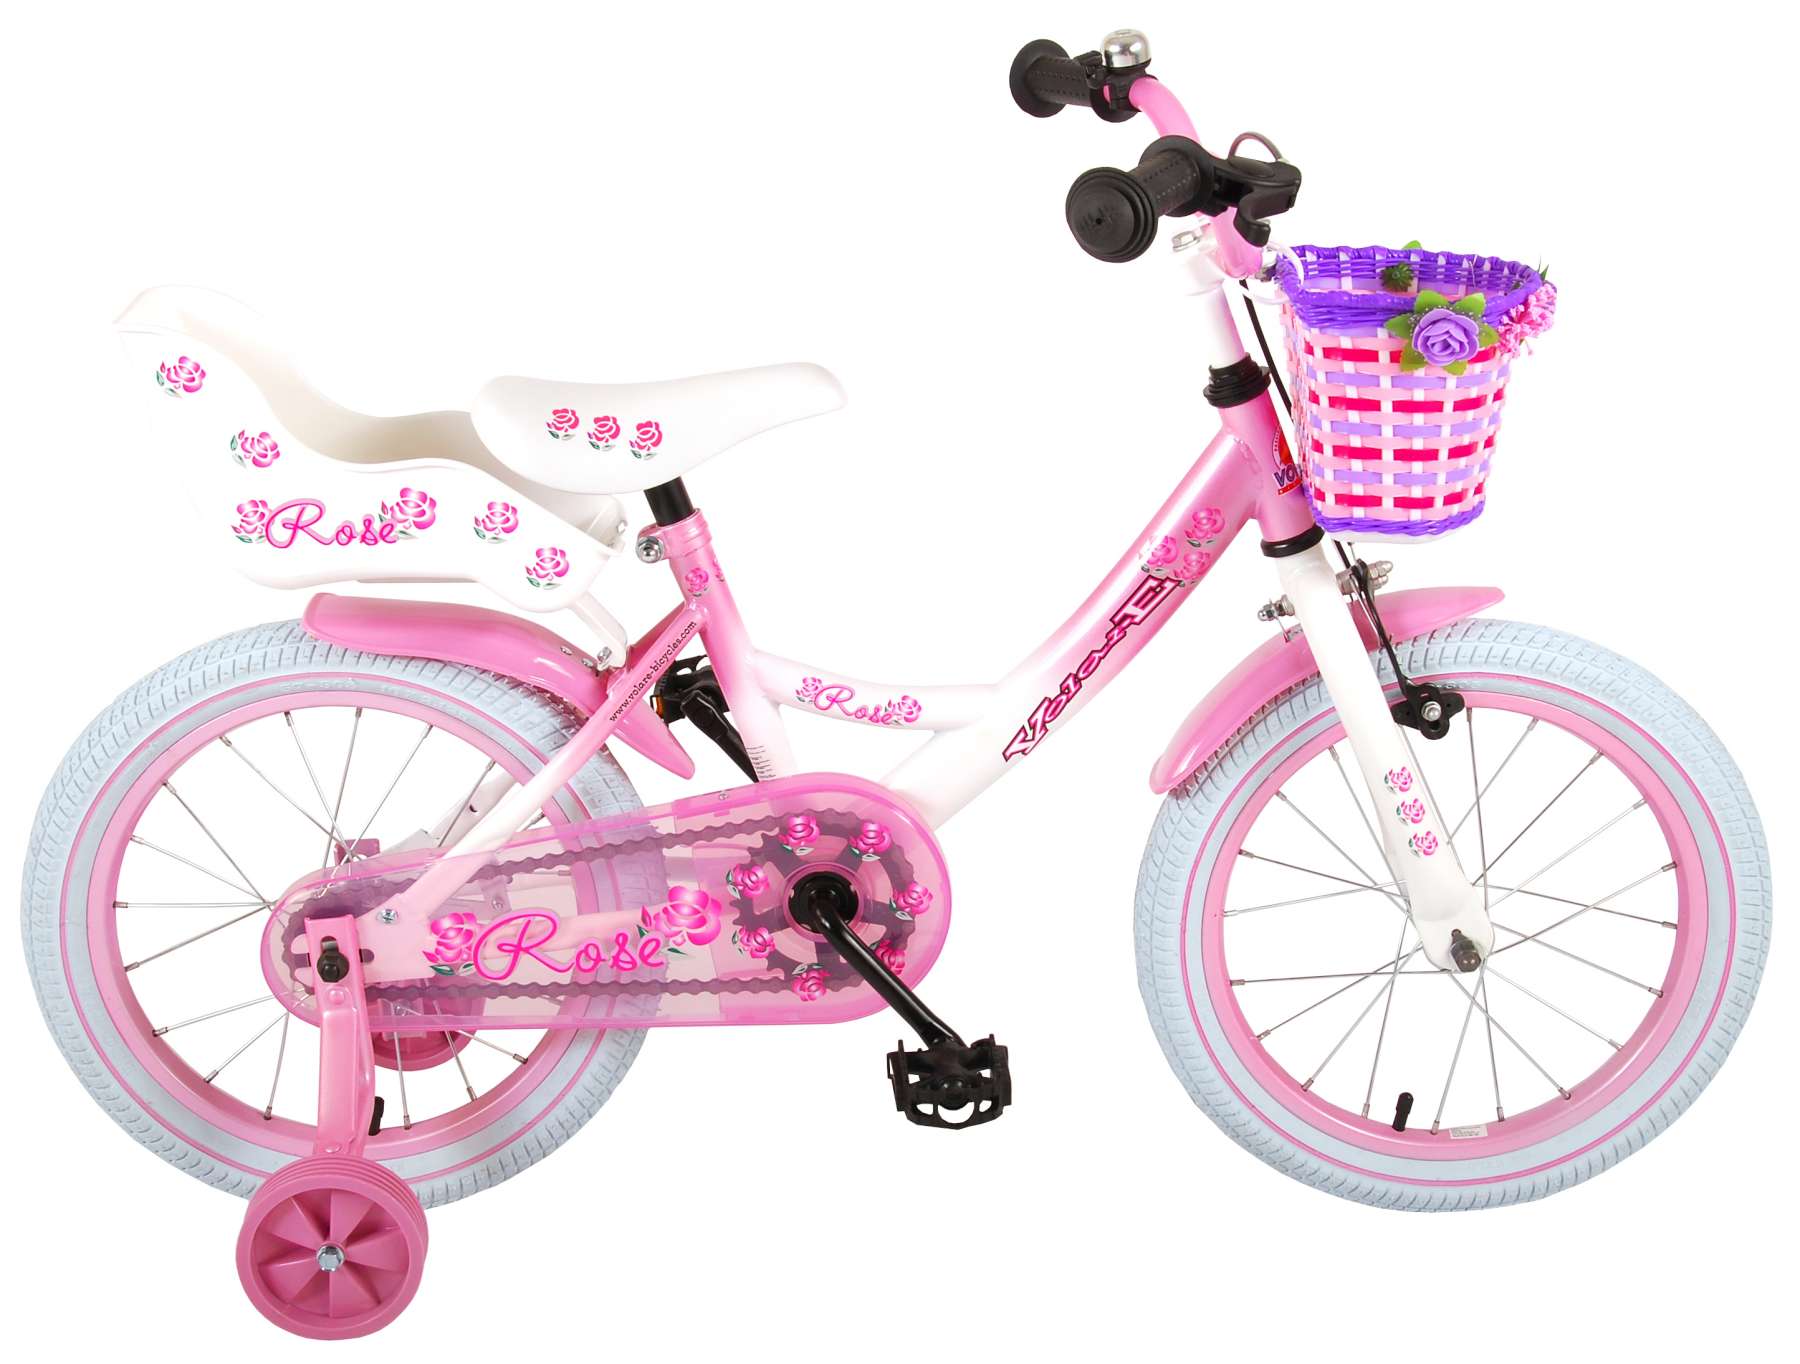 Volare - Children's Bicycle 14" - Rose Pink/white (81611)